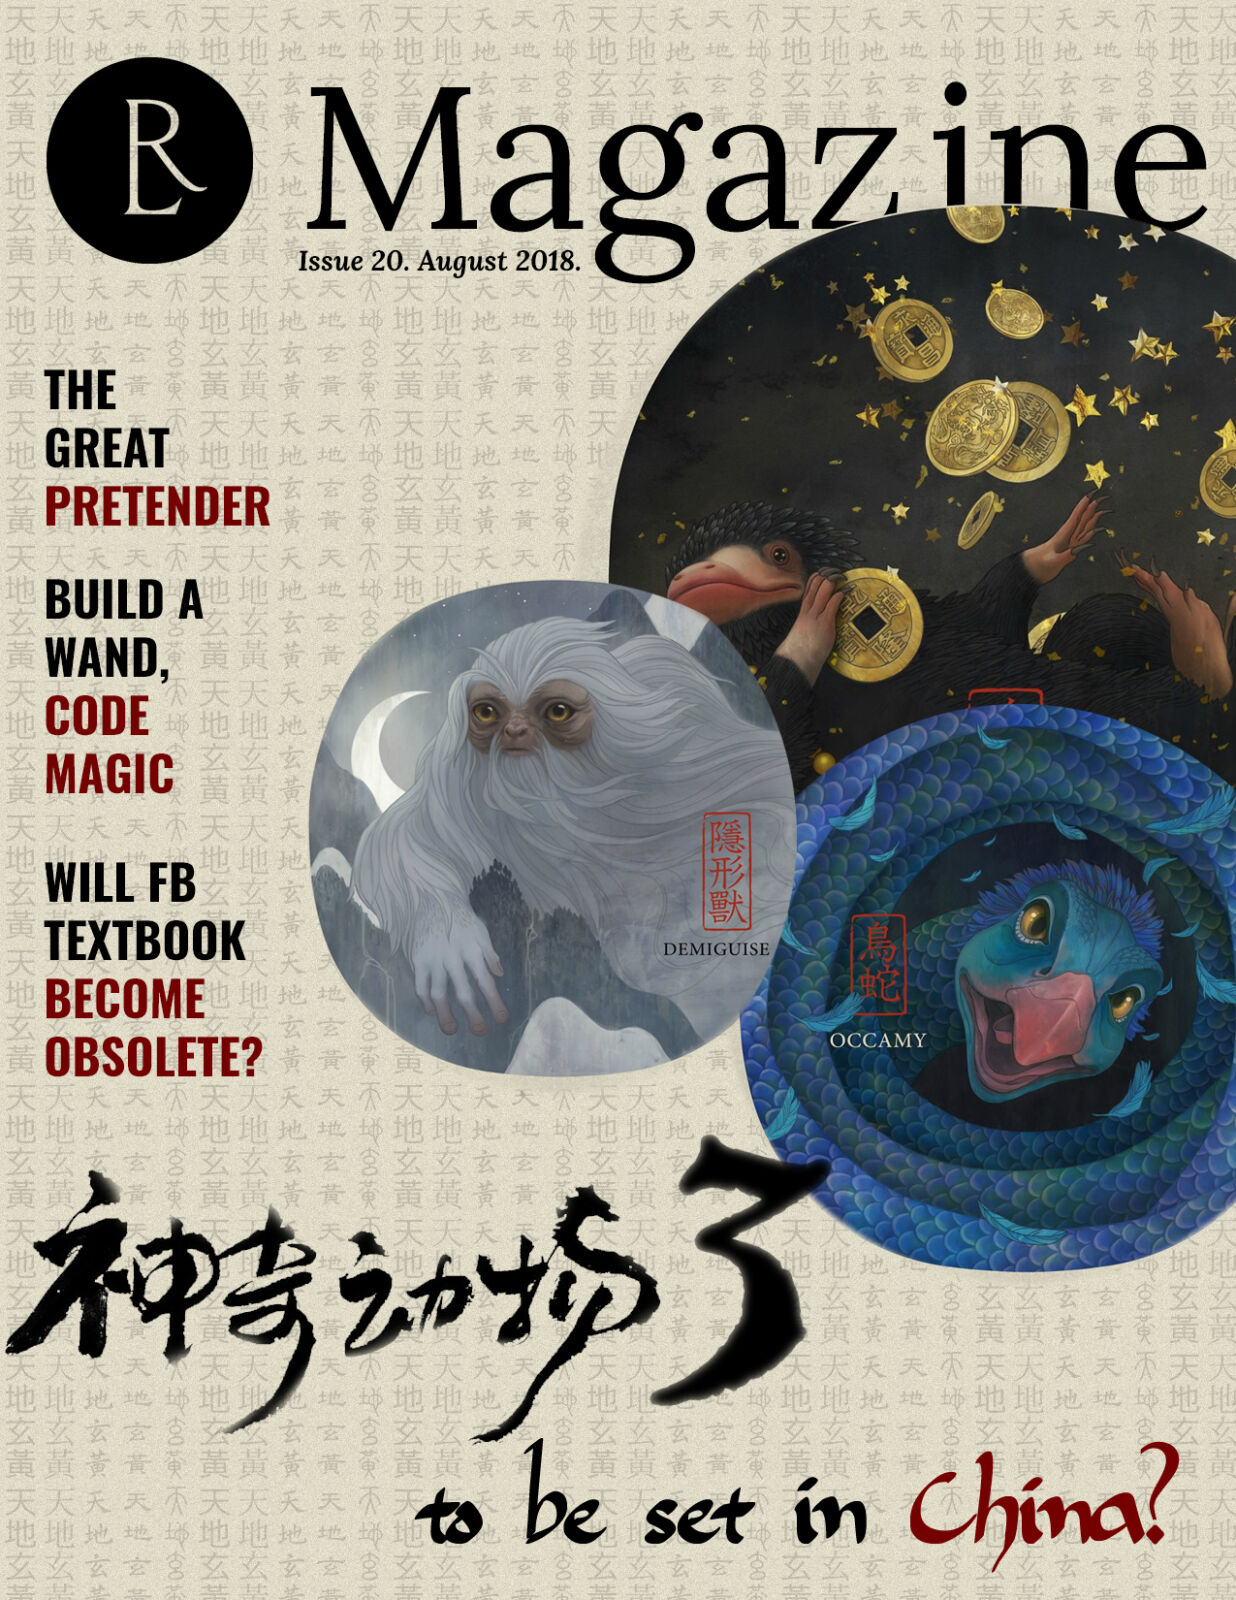 The Rowling Library Magazine #20 (August 2018): Fantastic Beasts 3 to be set in China?